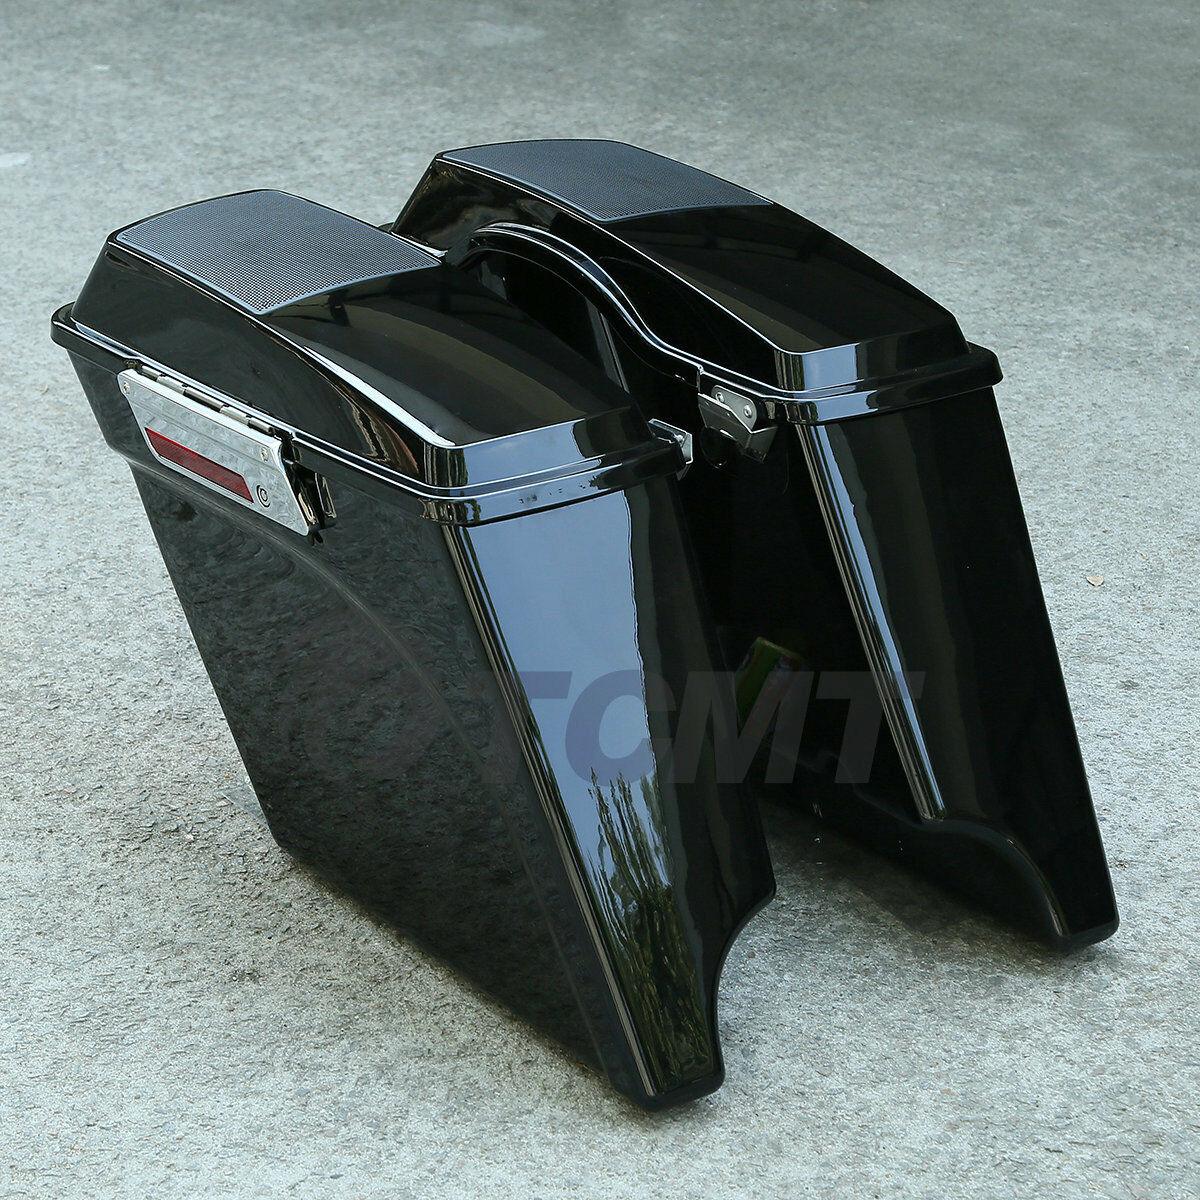 5" Stretched Extended Saddlebags 6x9" Speaker Lid For Harley Touring Glide 93-13 - Moto Life Products